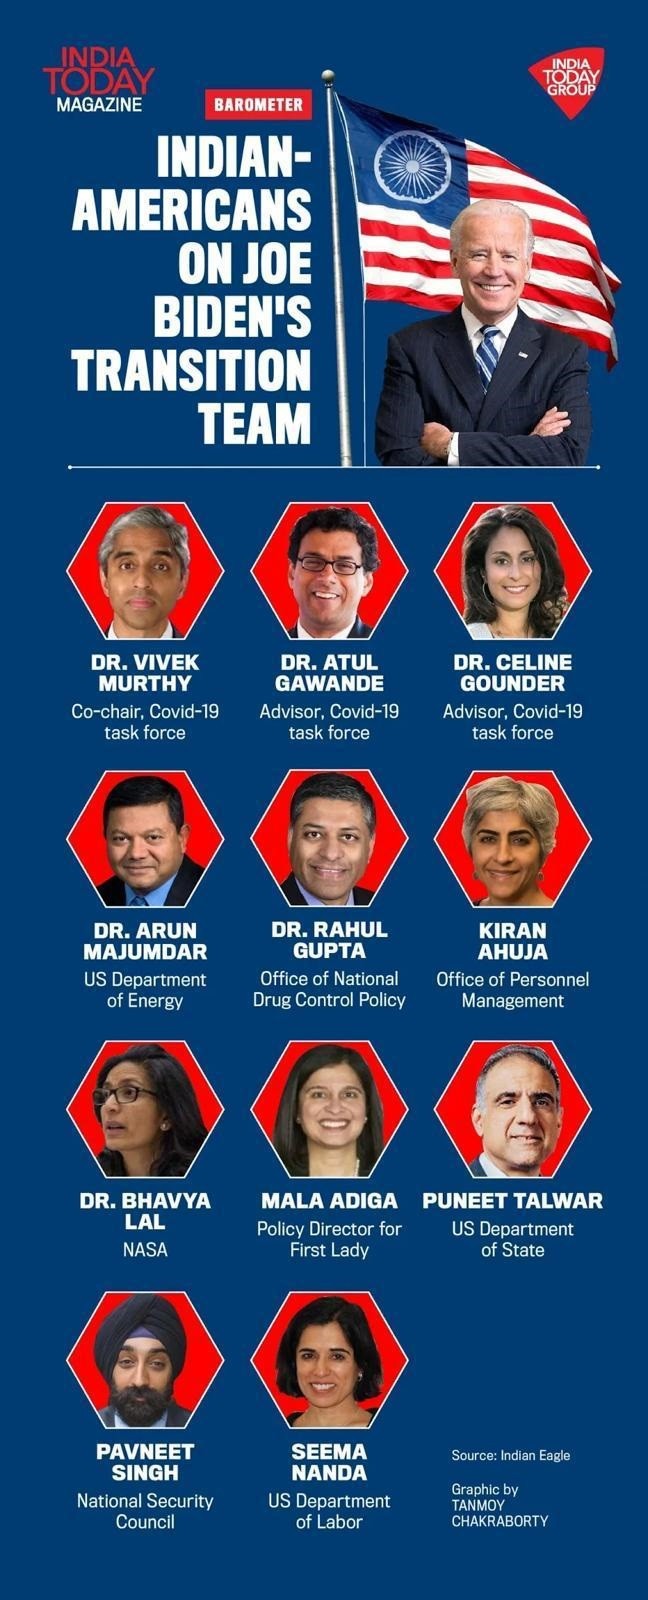 According to available data and India Today Magazine, COVID-19 Team of President-elect has three experts of Indian origins including Dr Vivek Murthy, Dr Atul Gawande and Dr Celine Gounder. Kiran Ahuja is included in Office of Personal Management and Mala Adiga will look after as Policy Director of First Lady. Other Indian-Americans who are part of Transition Team include Dr Arun Majumdar (US Department of Energy), Dr Rahul Gupta (Office of National Drug Control Policy), Dr Bhavya Lal (NASA), Puneet Talwar (US Department of State), Pavneet Singh (National Security Council) and Seema Nanda (US Department of Labour).